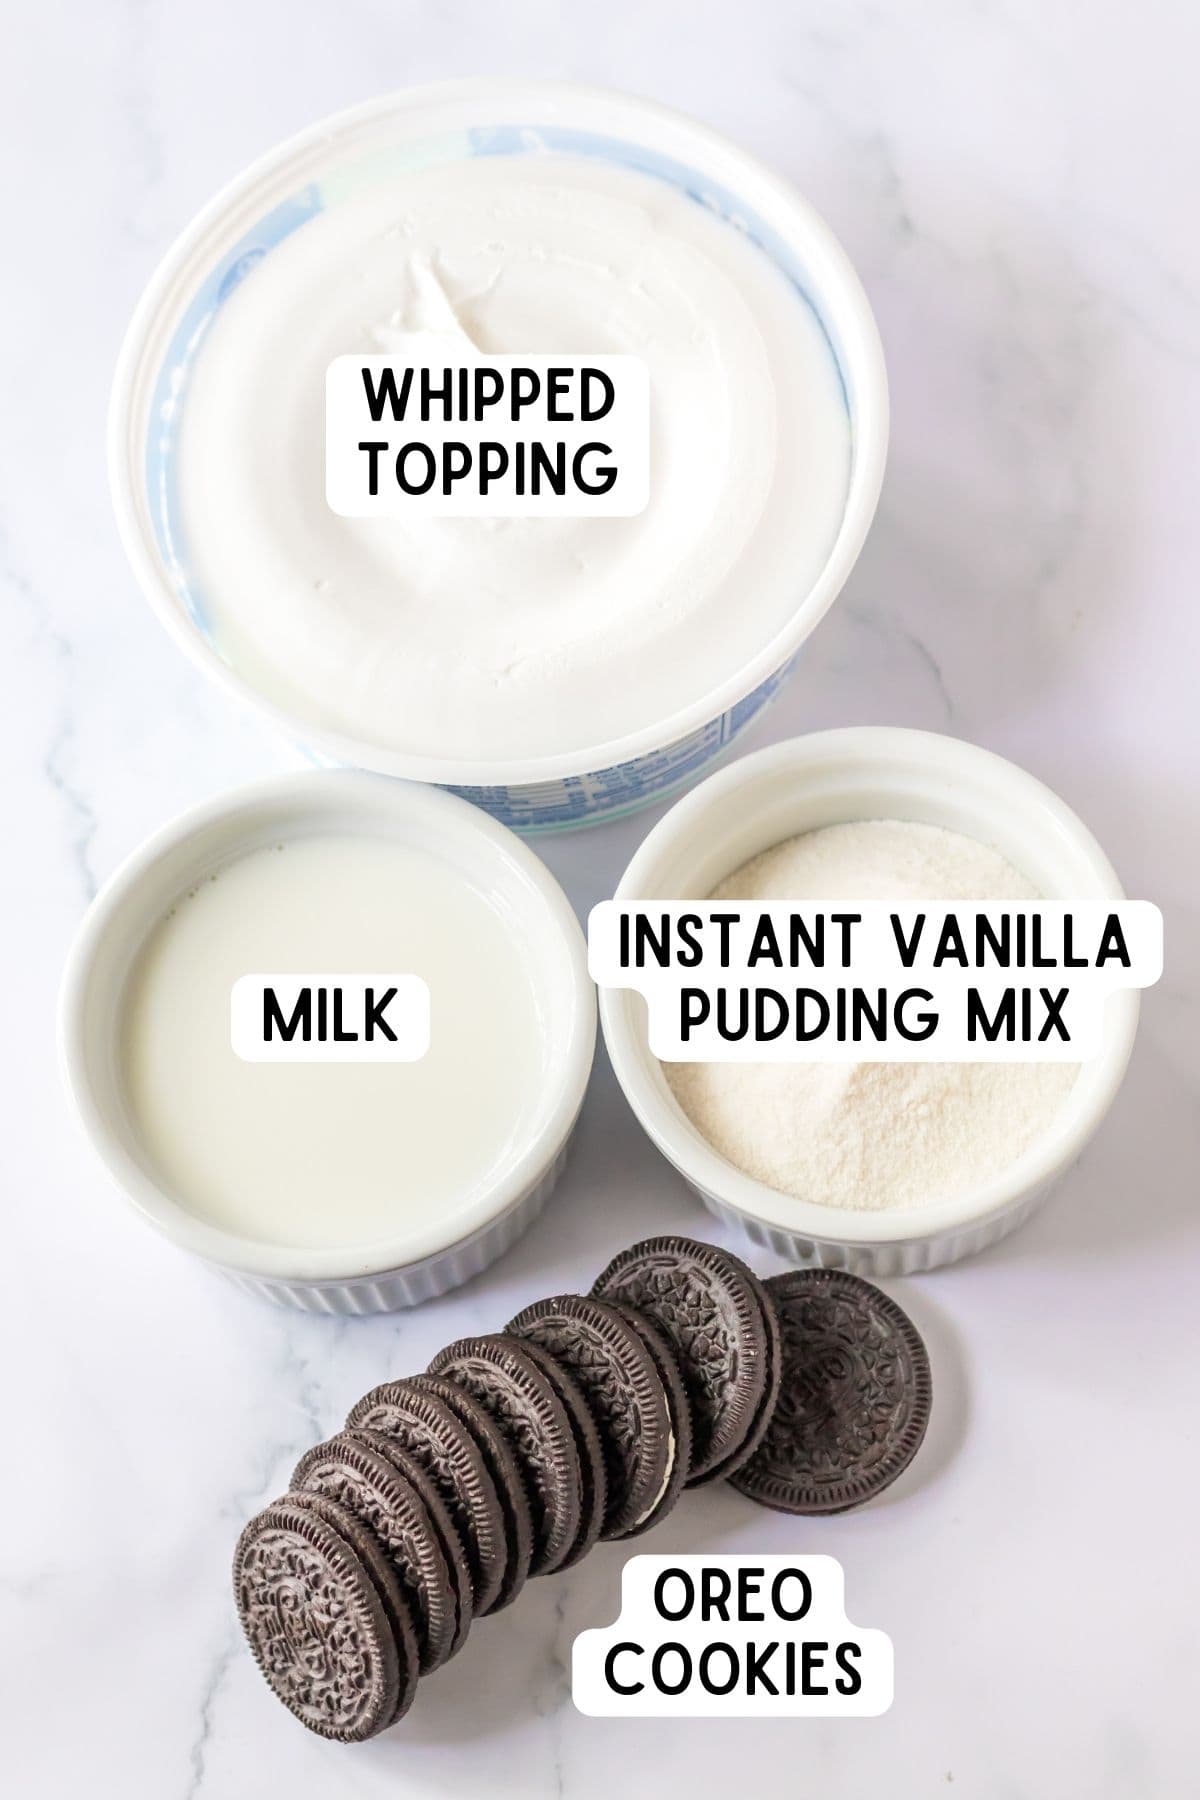 Whipped topping, milk, instant vanilla pudding mix, oreo cookies, and milk.